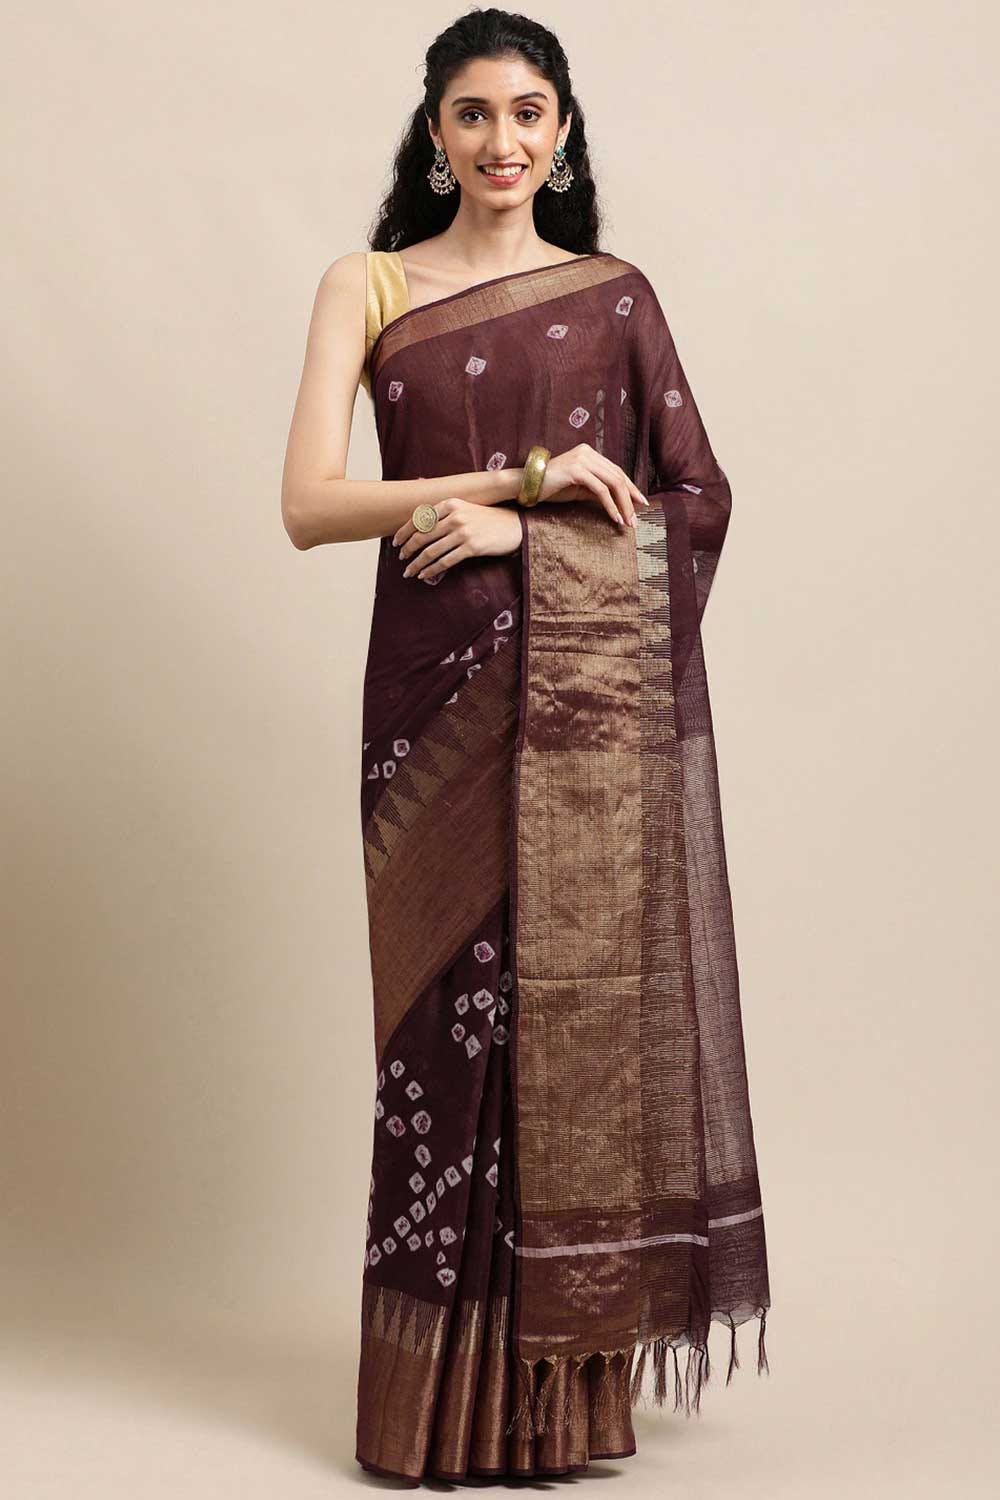 The Timeless Elegance of Bandhani Sarees: Unveiling the Beauty of